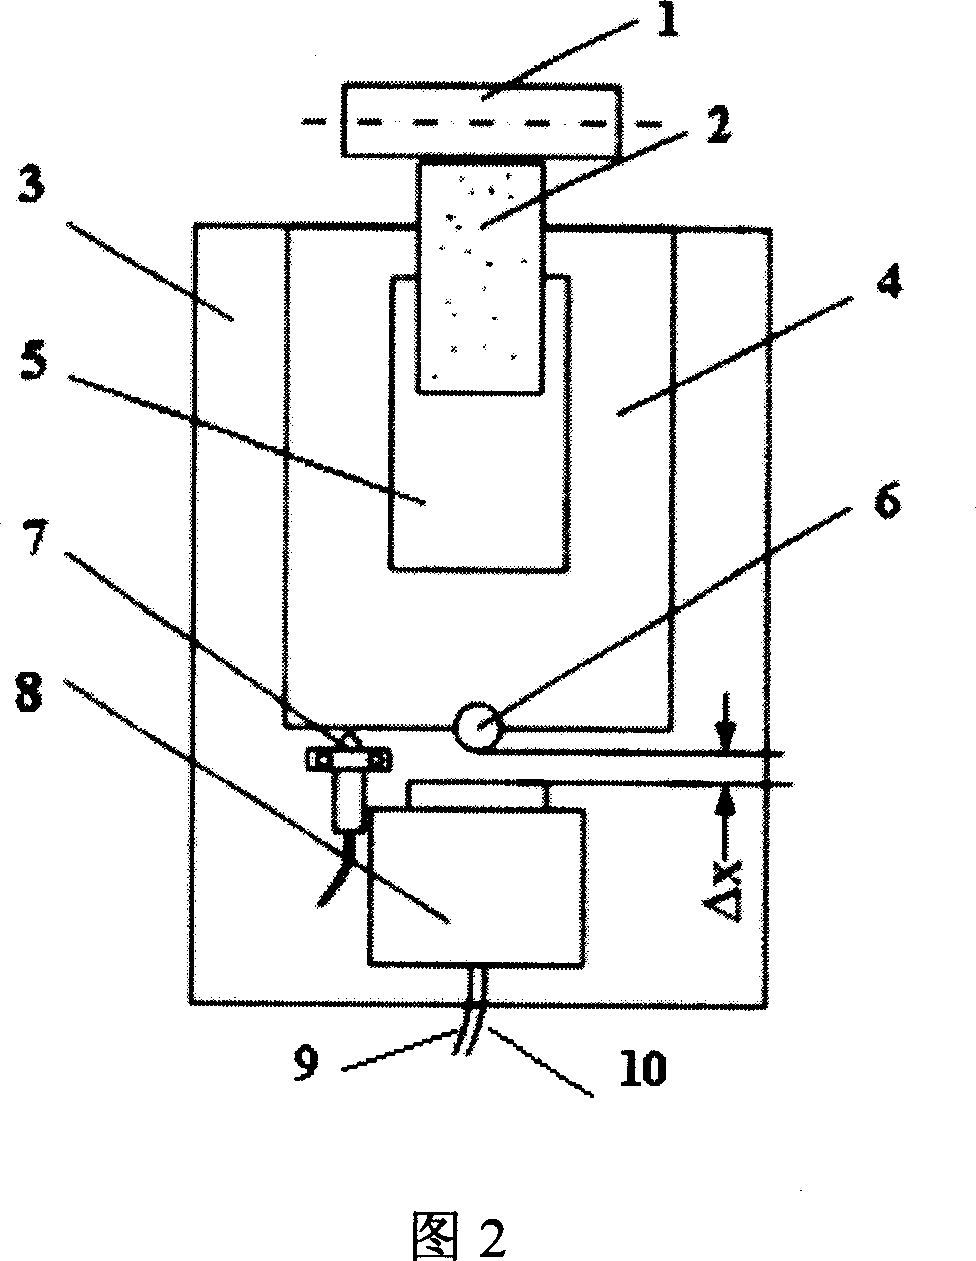 Microfeeding system for precisive grinding